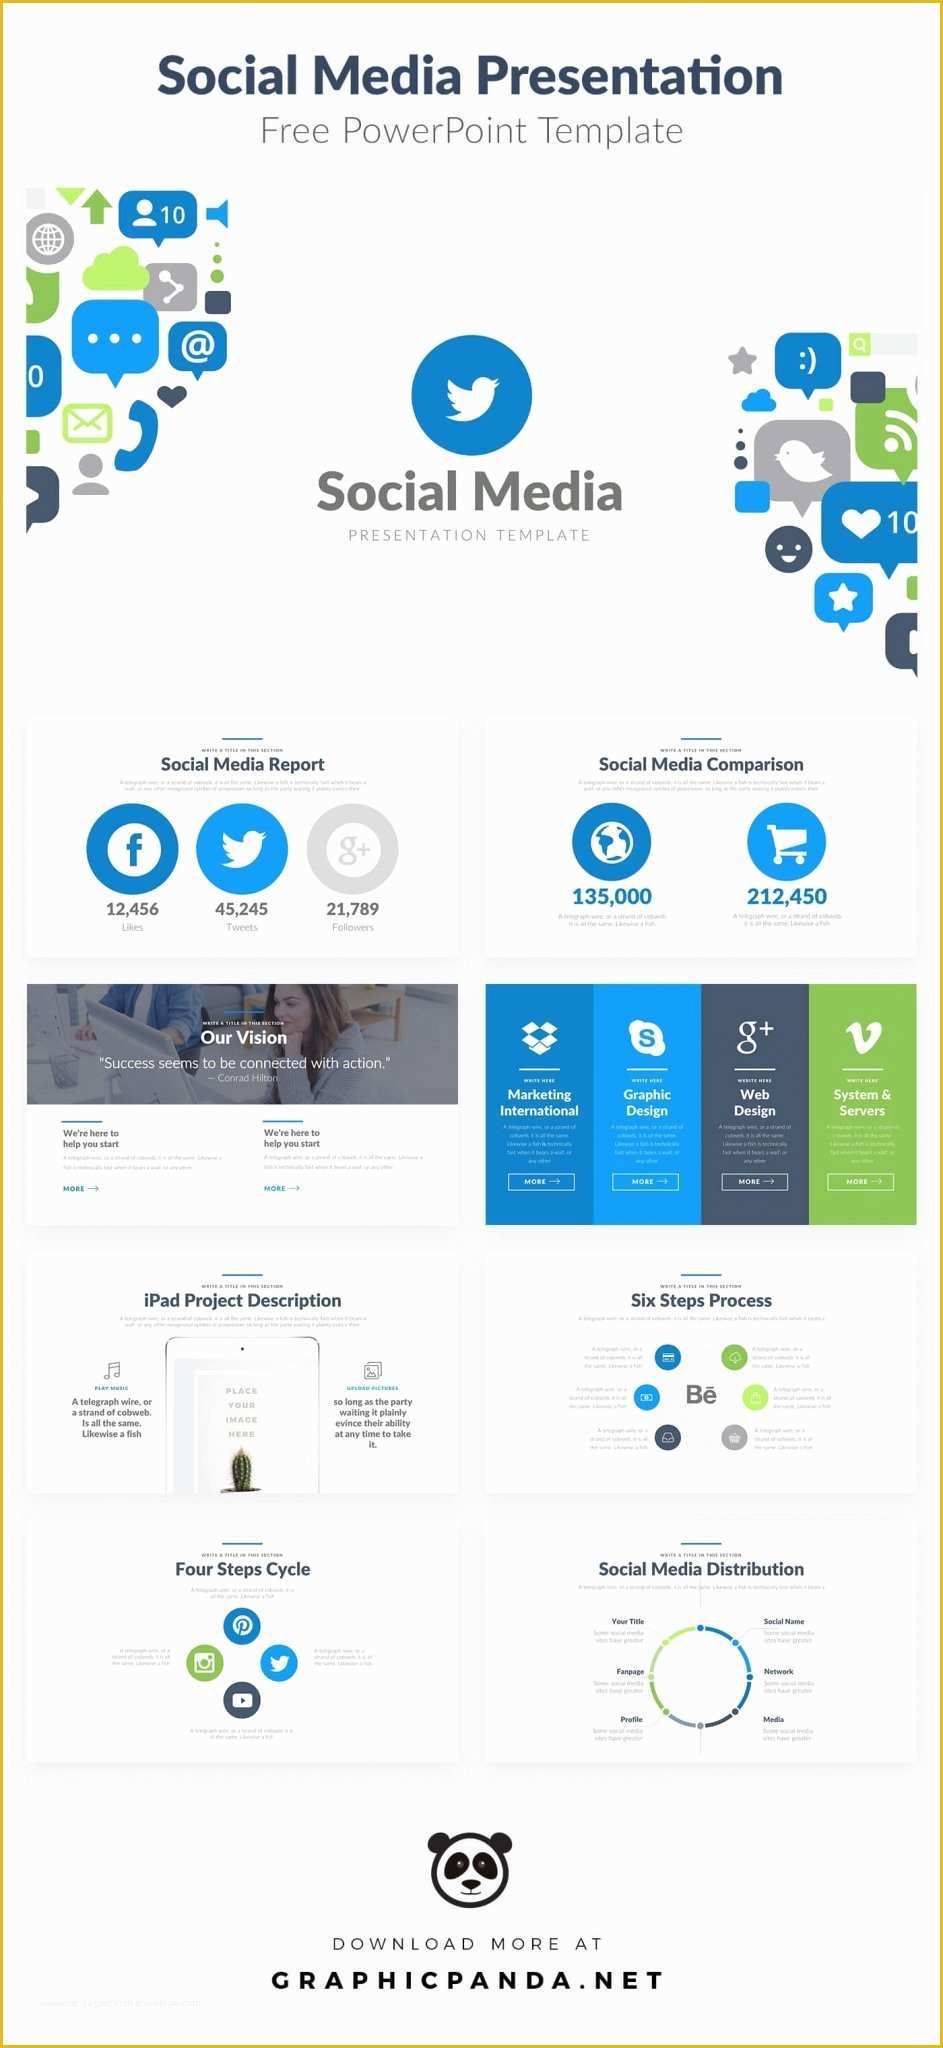 Social Media Plan Template Free Of 10 Free social Media Slides Templates for Microsoft Powerpoint